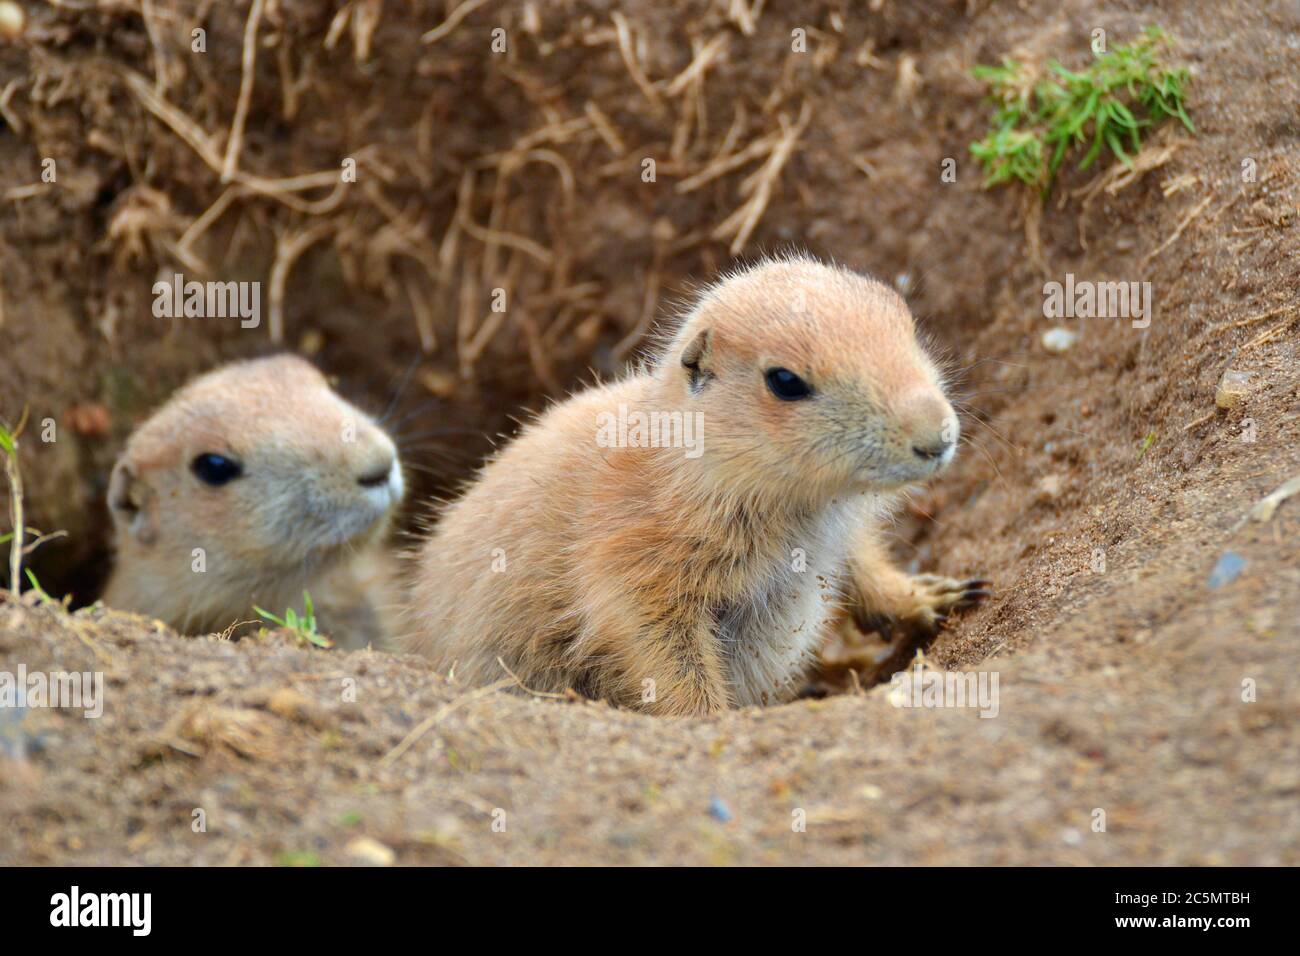 Young prairie dogs coming out of their burrow at Banham Zoo, Banham, Norfolk, England, UK Stock Photo